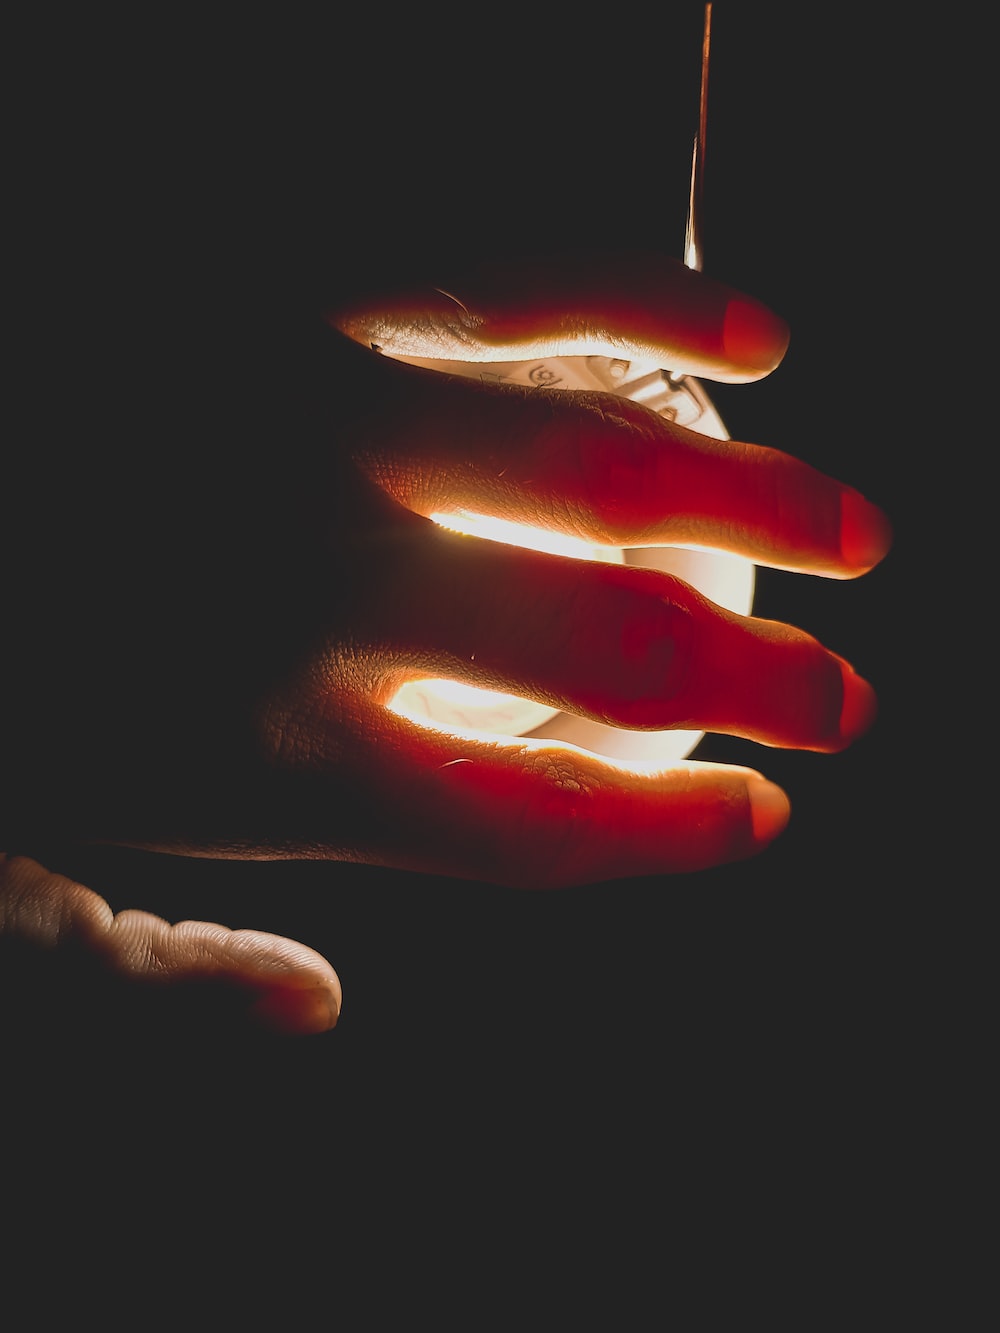 A hand holding an object with light coming from it - Nails